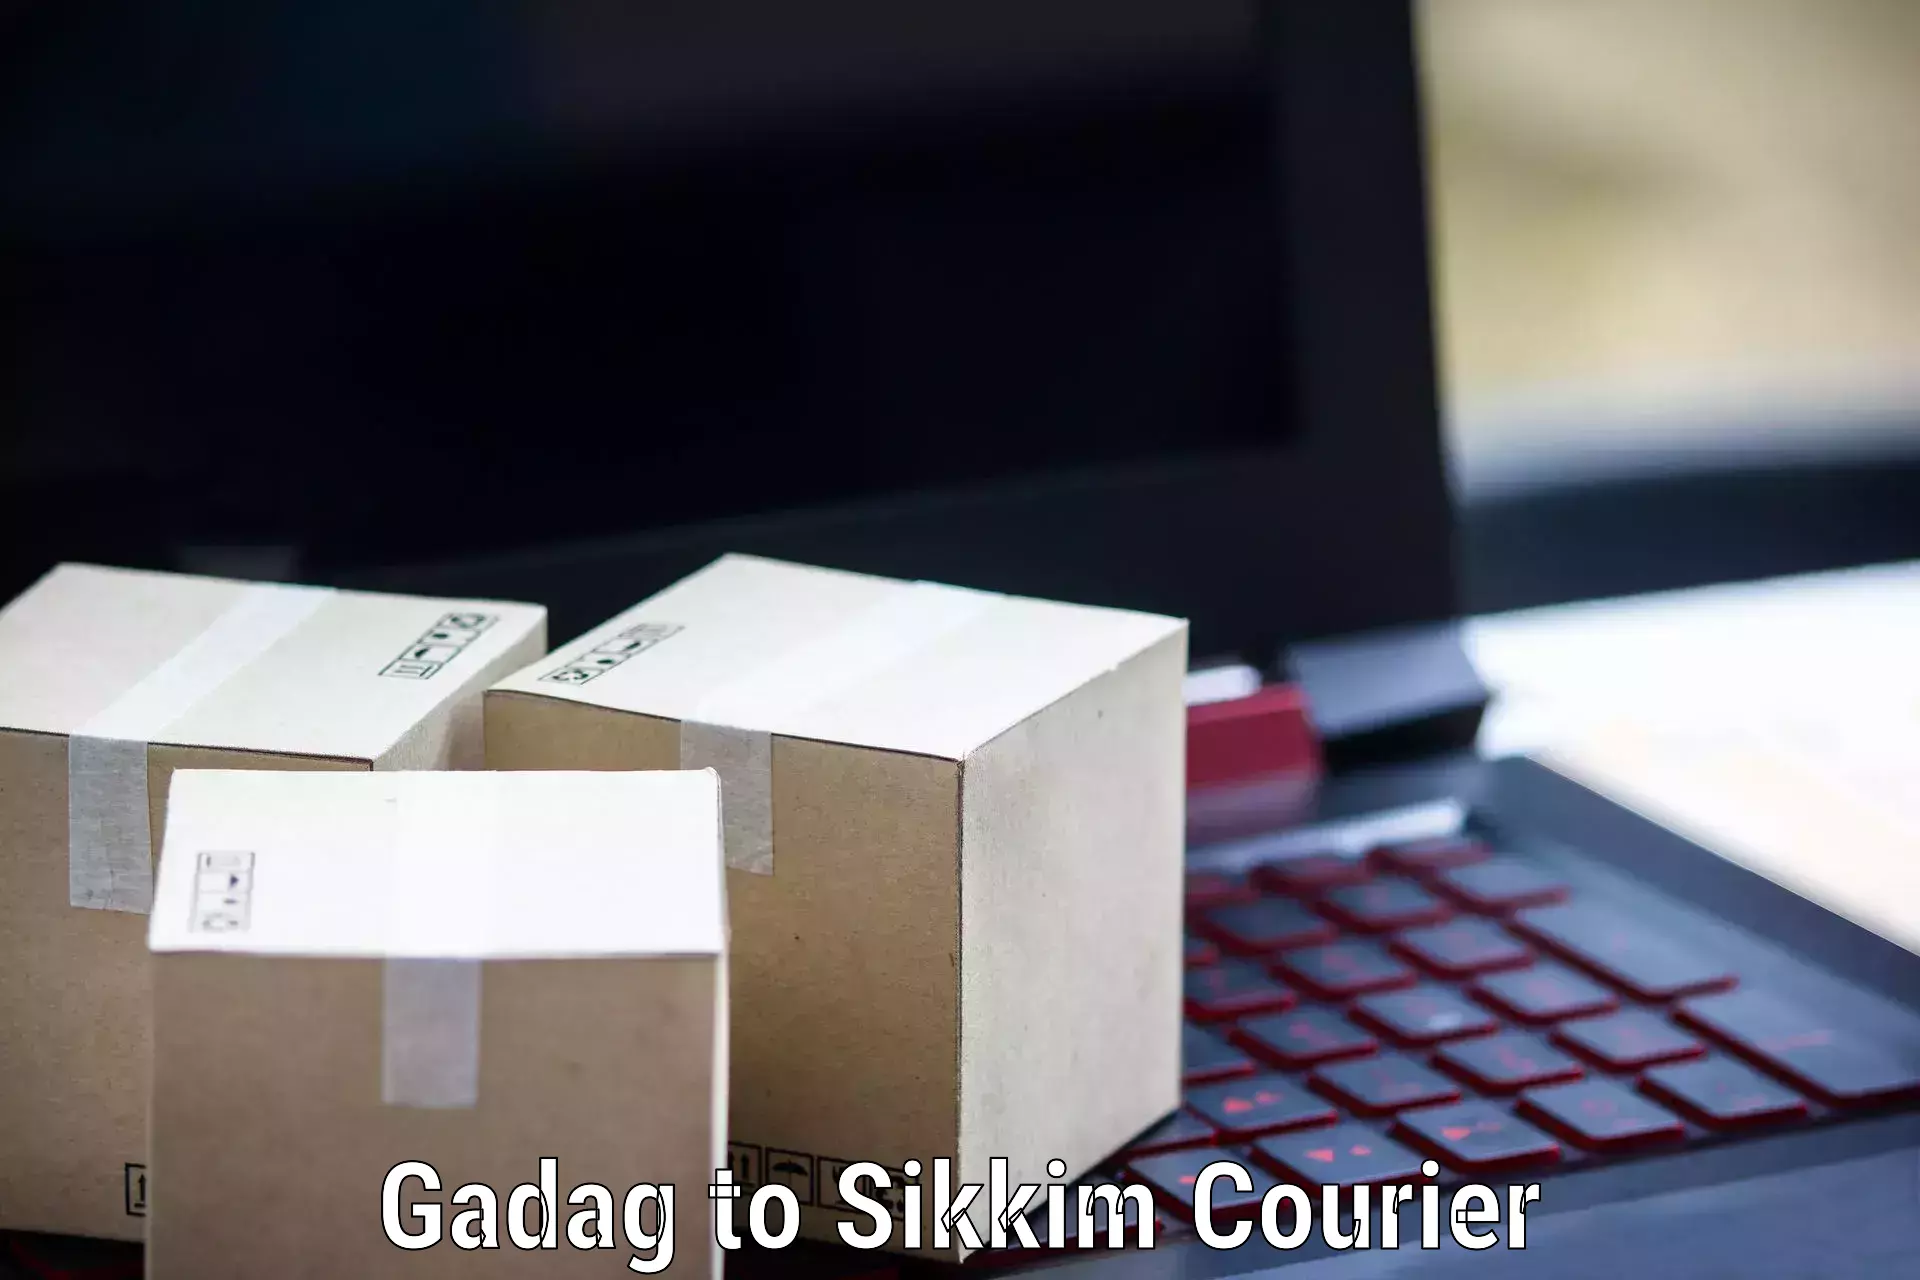 State-of-the-art courier technology Gadag to South Sikkim